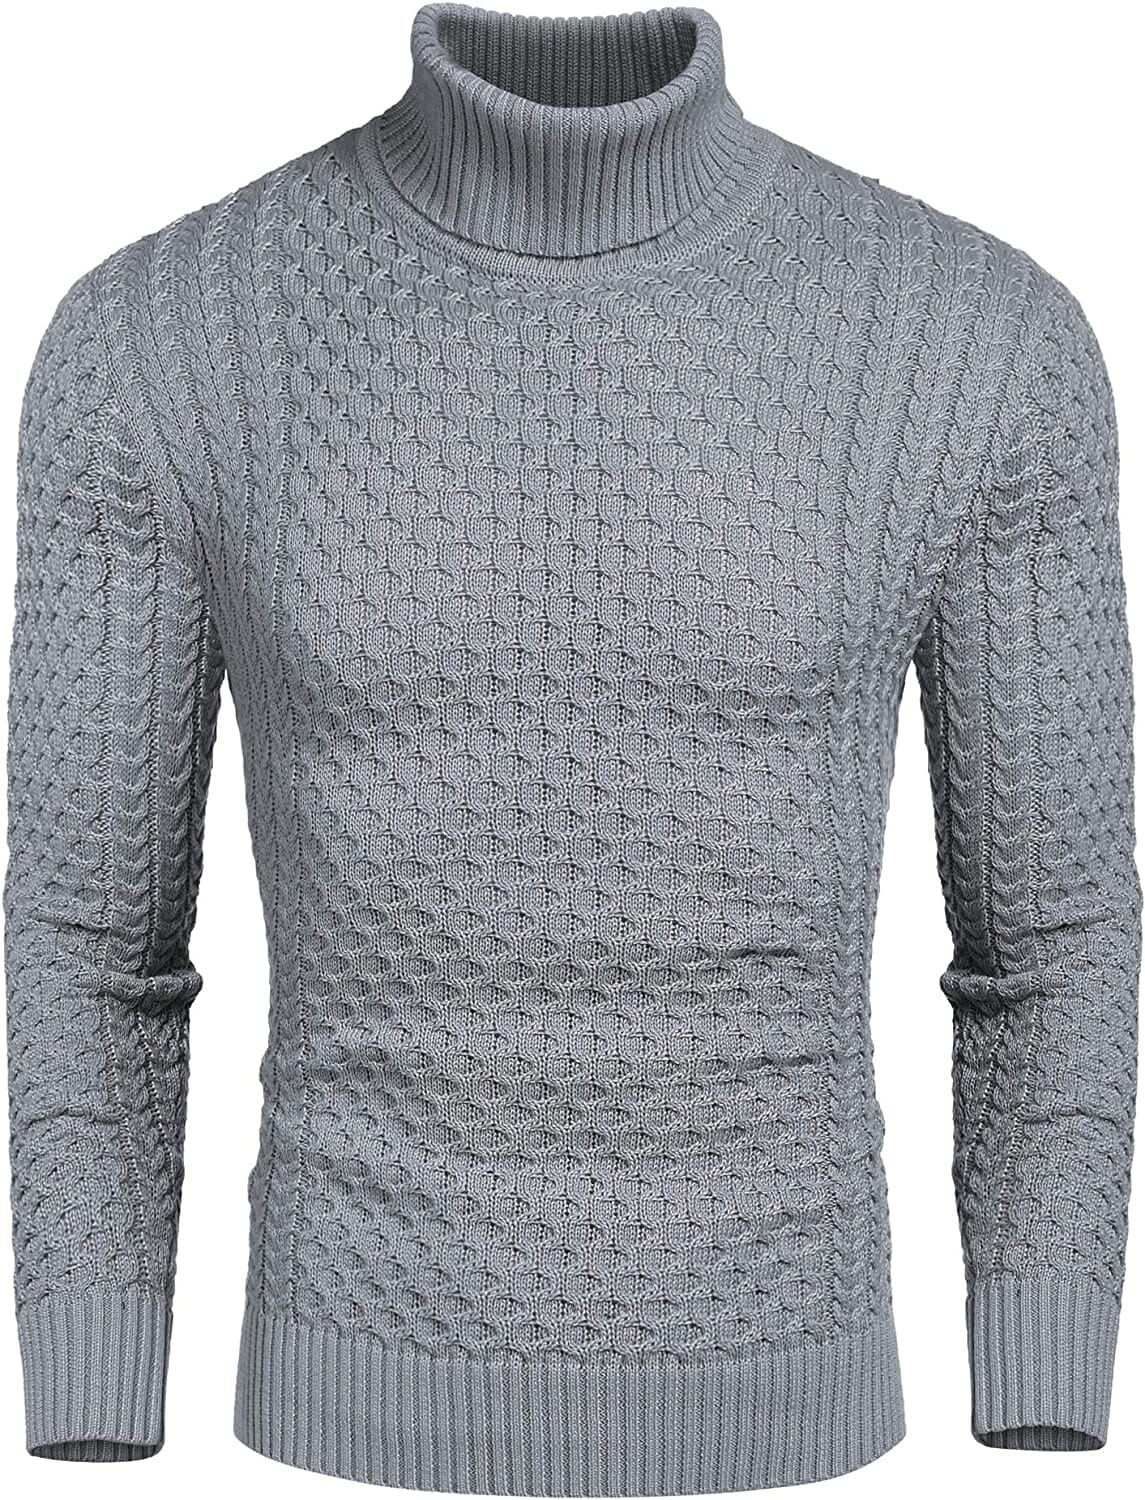 Slim Fit Turtleneck Twisted Sweater (US Only) Sweaters Coofandy's 